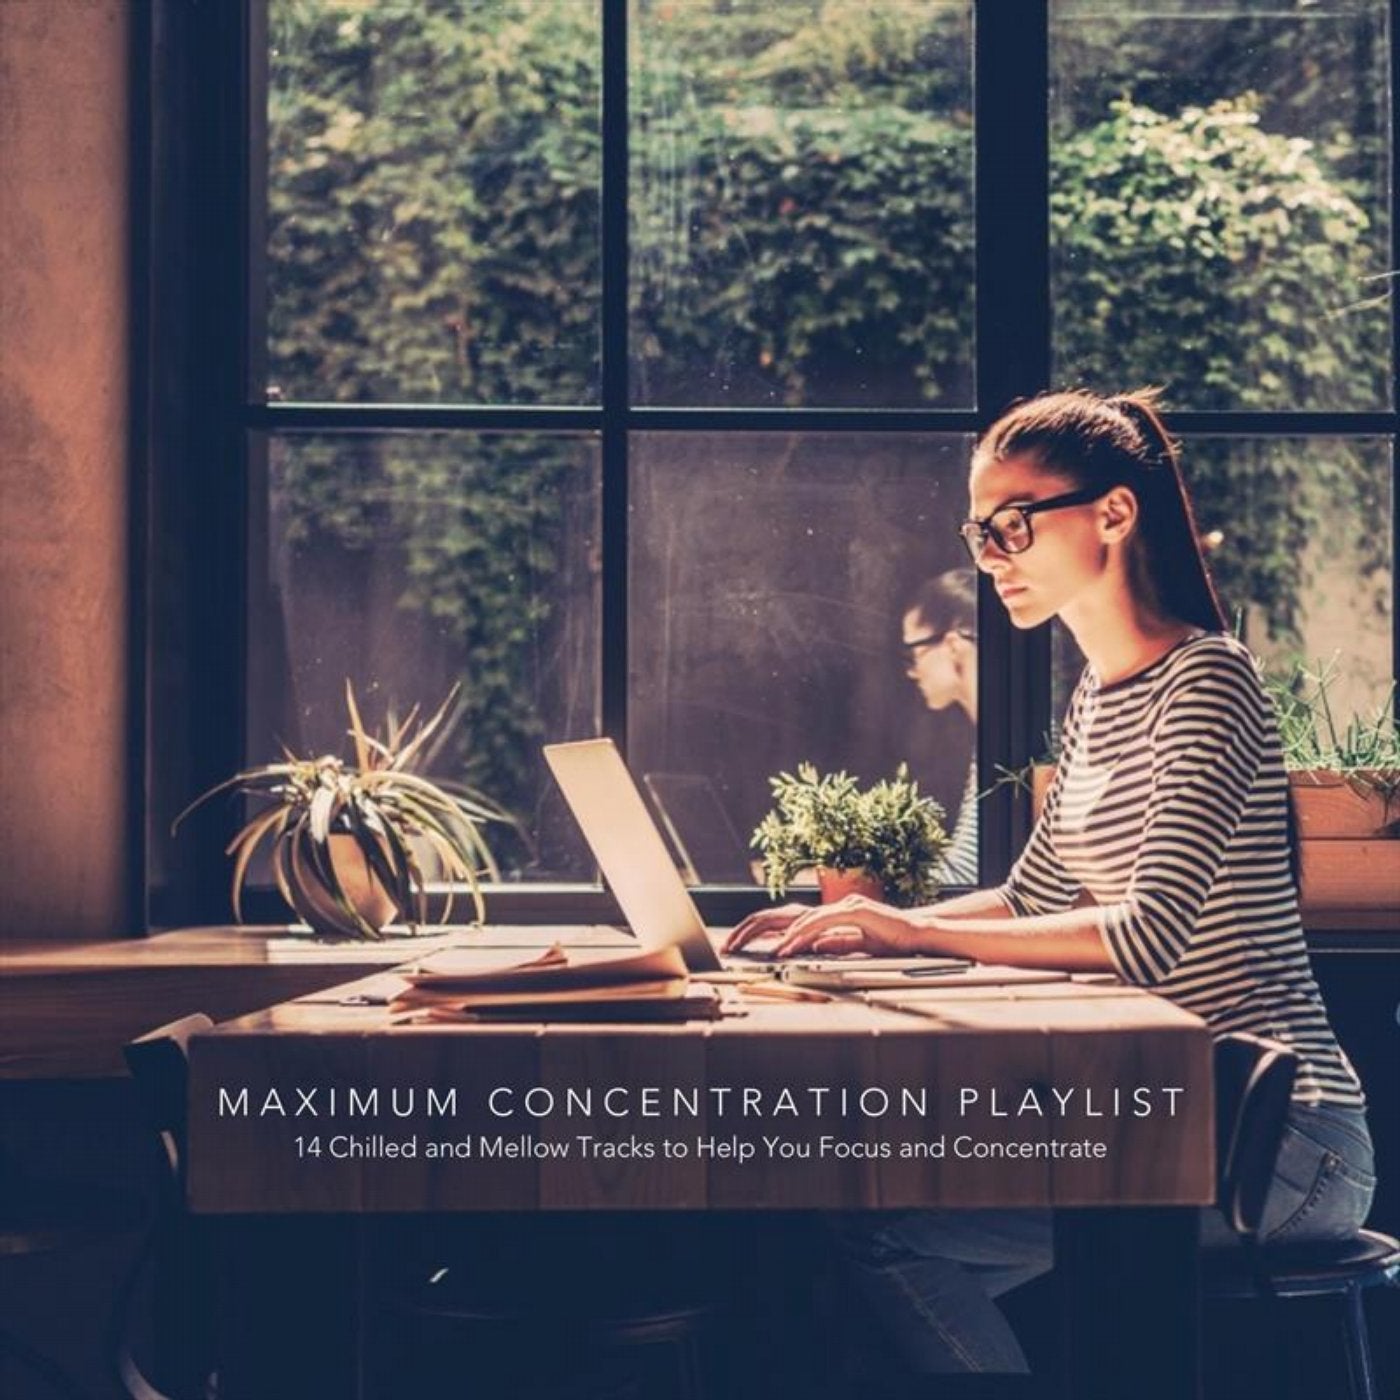 Maximum Concentration Playlist: 14 Chilled and Mellow Tracks to Help You Focus and Concentrate